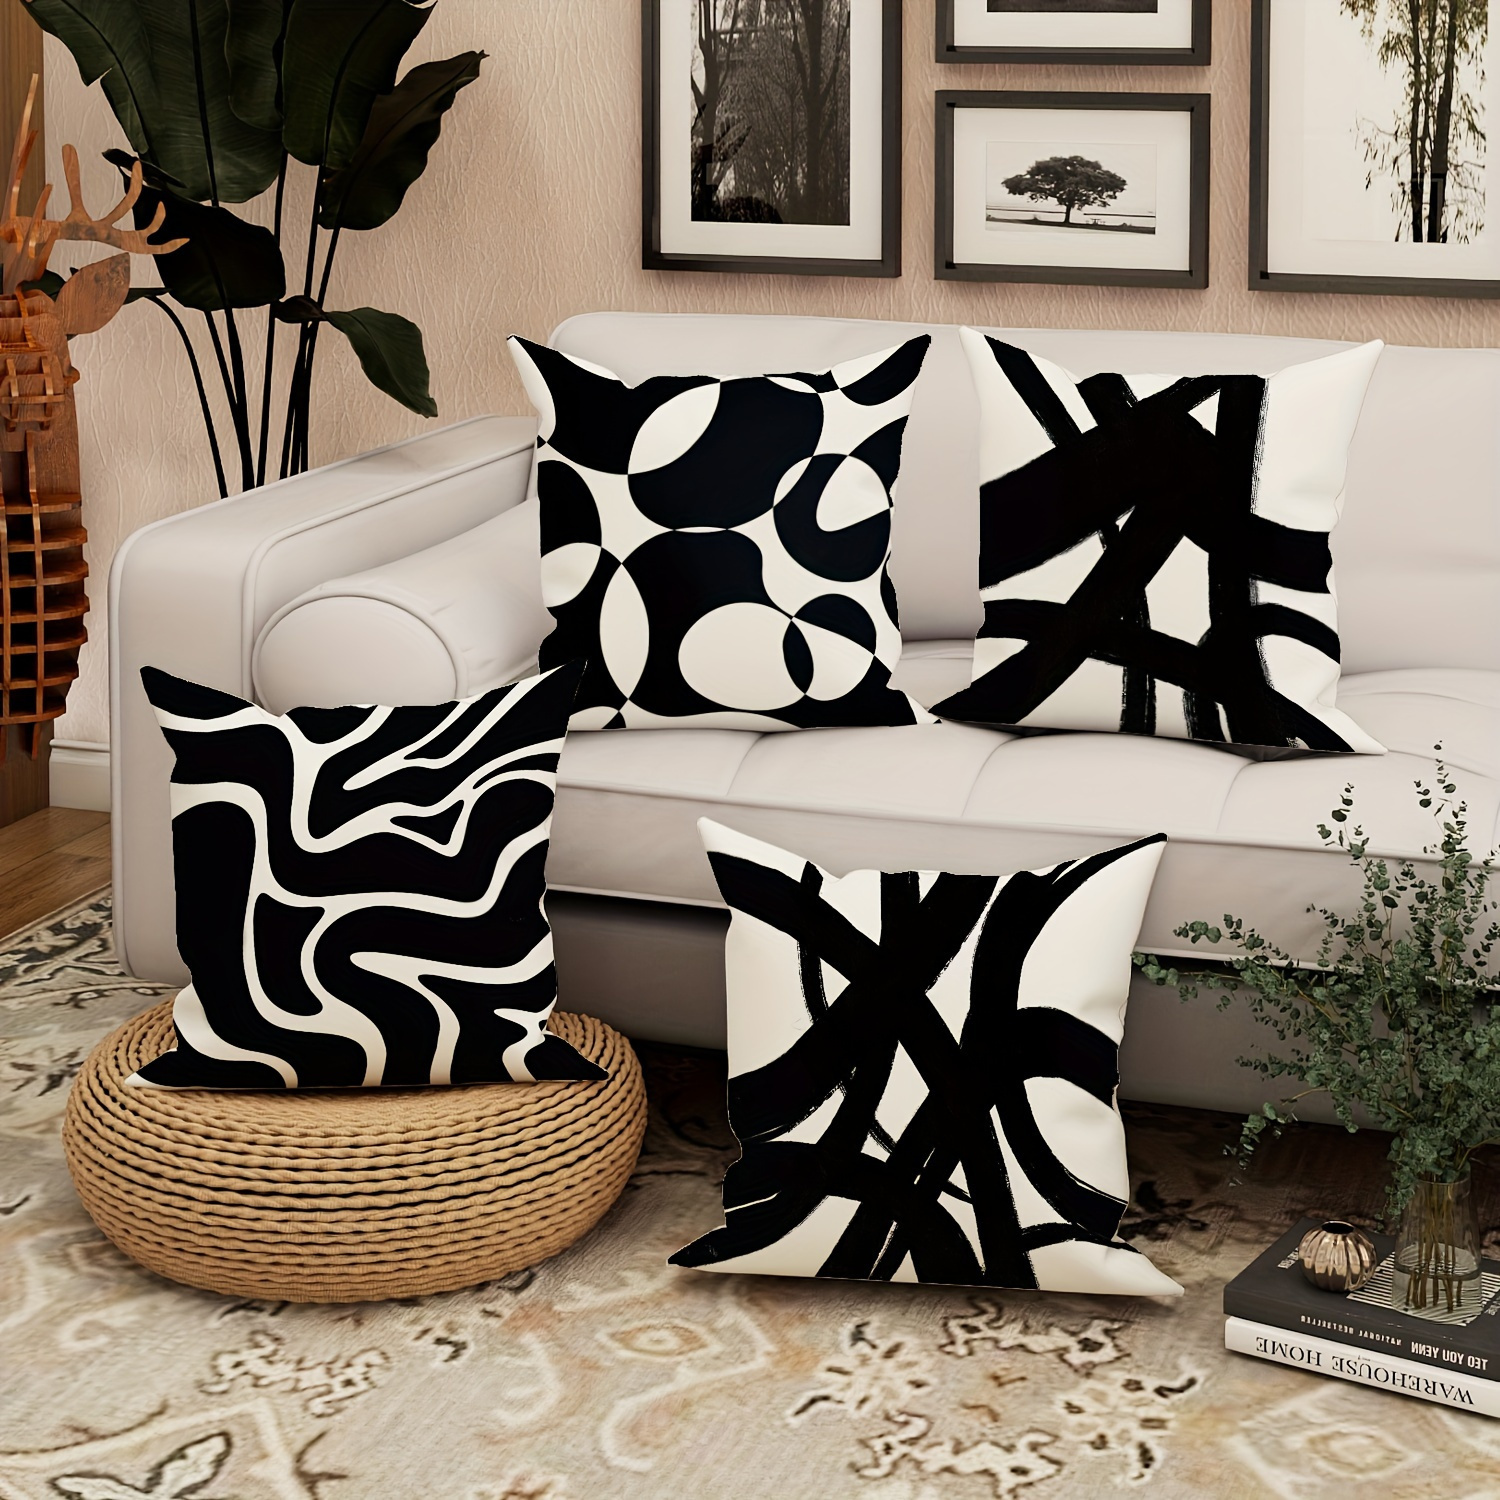 

4pcs, Polyester Black And White Abstract Throw Pillow Covers, Contemporary Style, Printed Design, Suitable For Living Room, Bedroom, Sofa, And Bed, 45x45cm/18"x18", Zipper Closure, Machine Washable